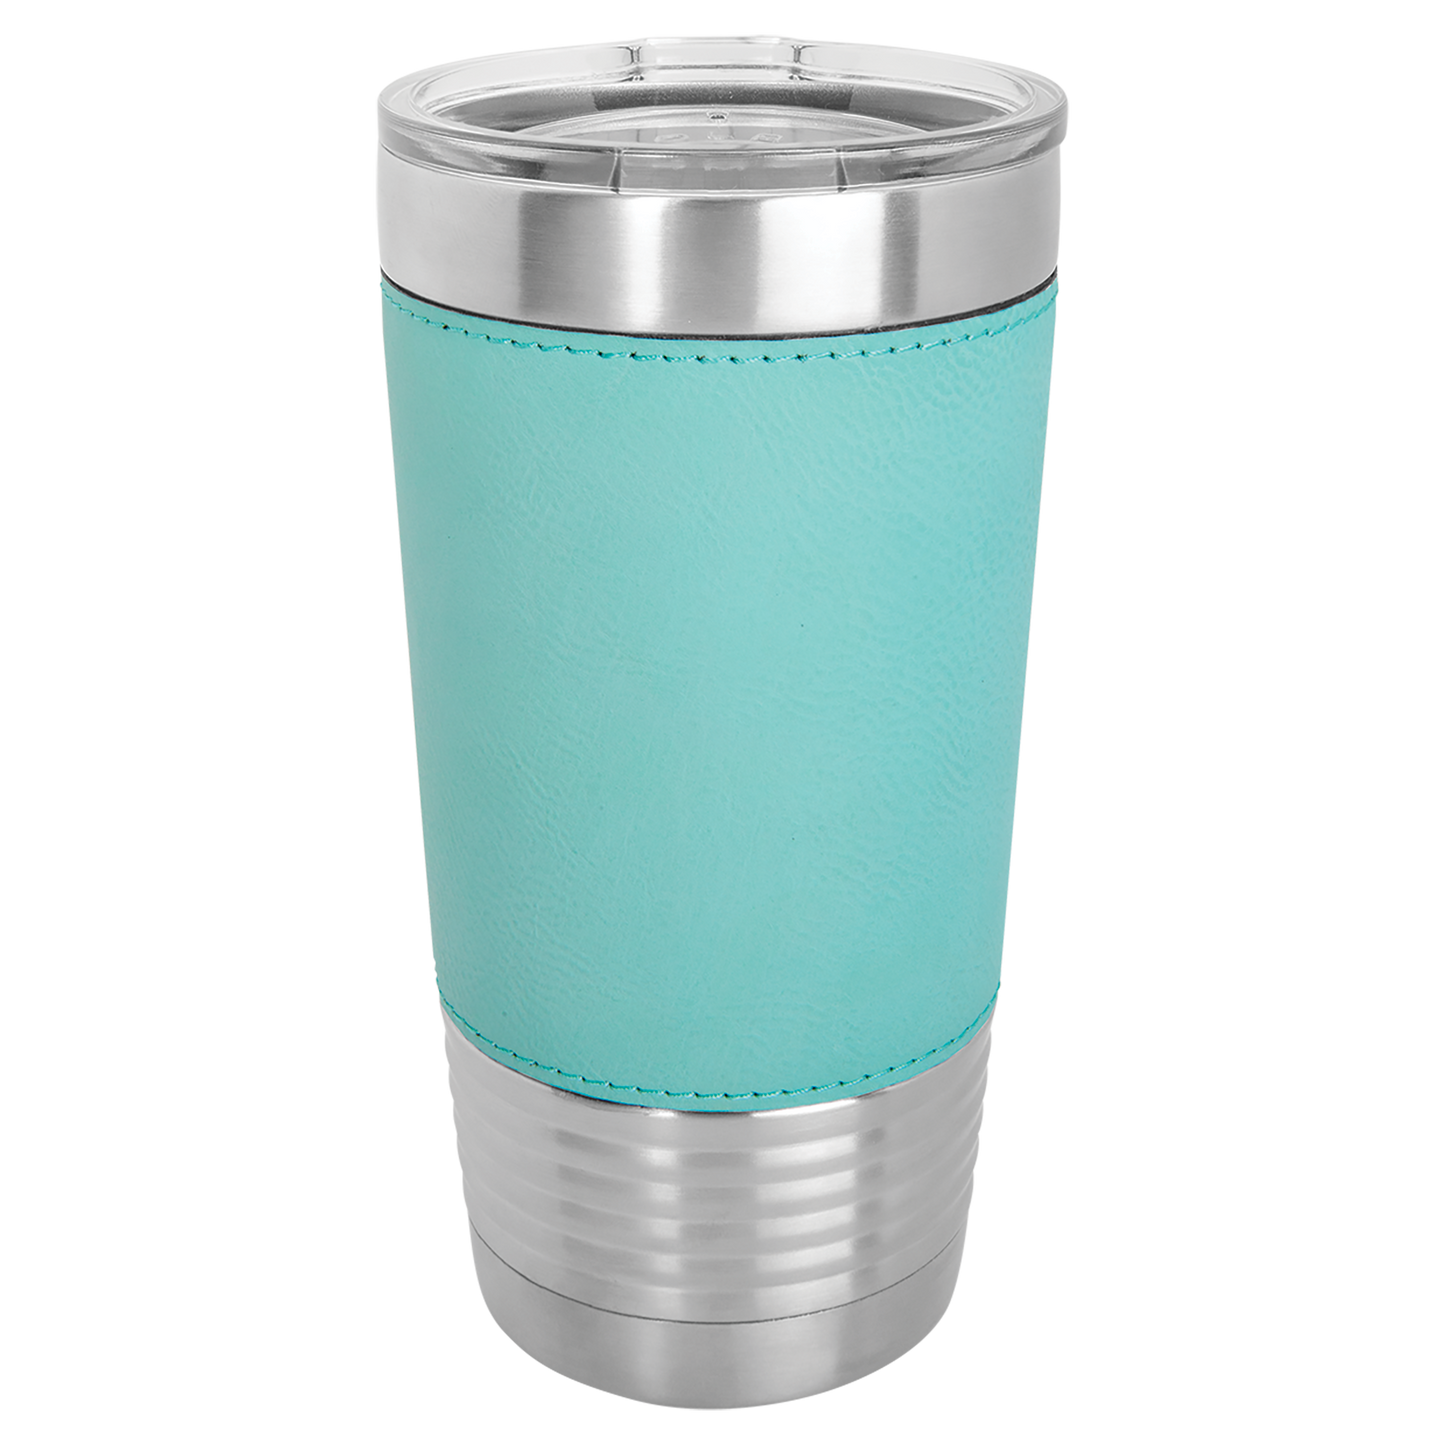 Luxury Leatherette (Vegan Leather) 20 oz tumbler  - can be personalized